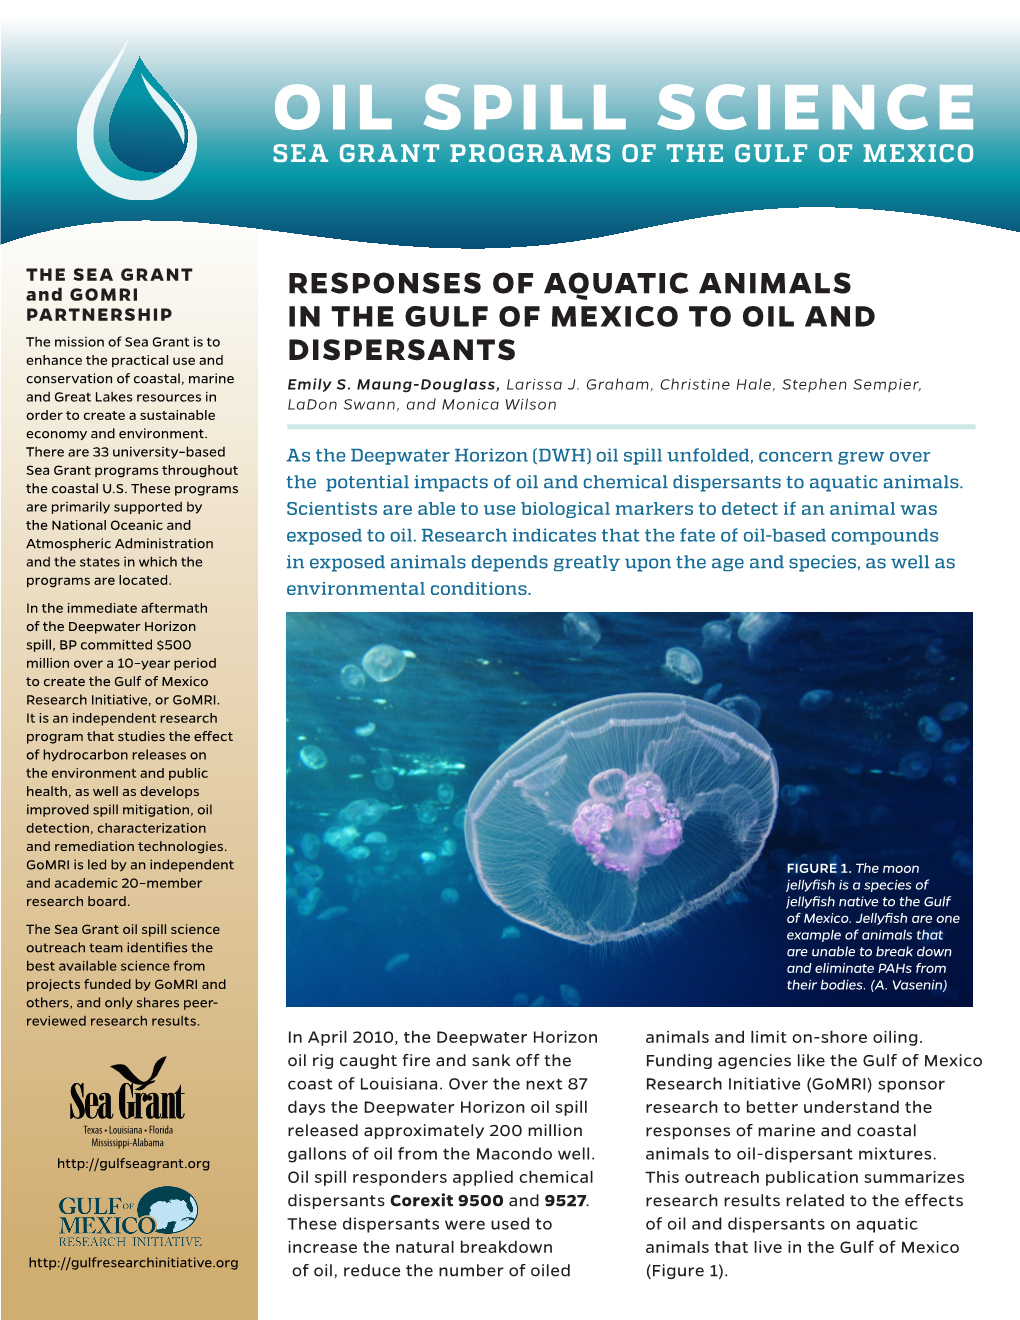 Responses of Aquatic Animals in the Gulf of Mexico to Oil and Dispersants